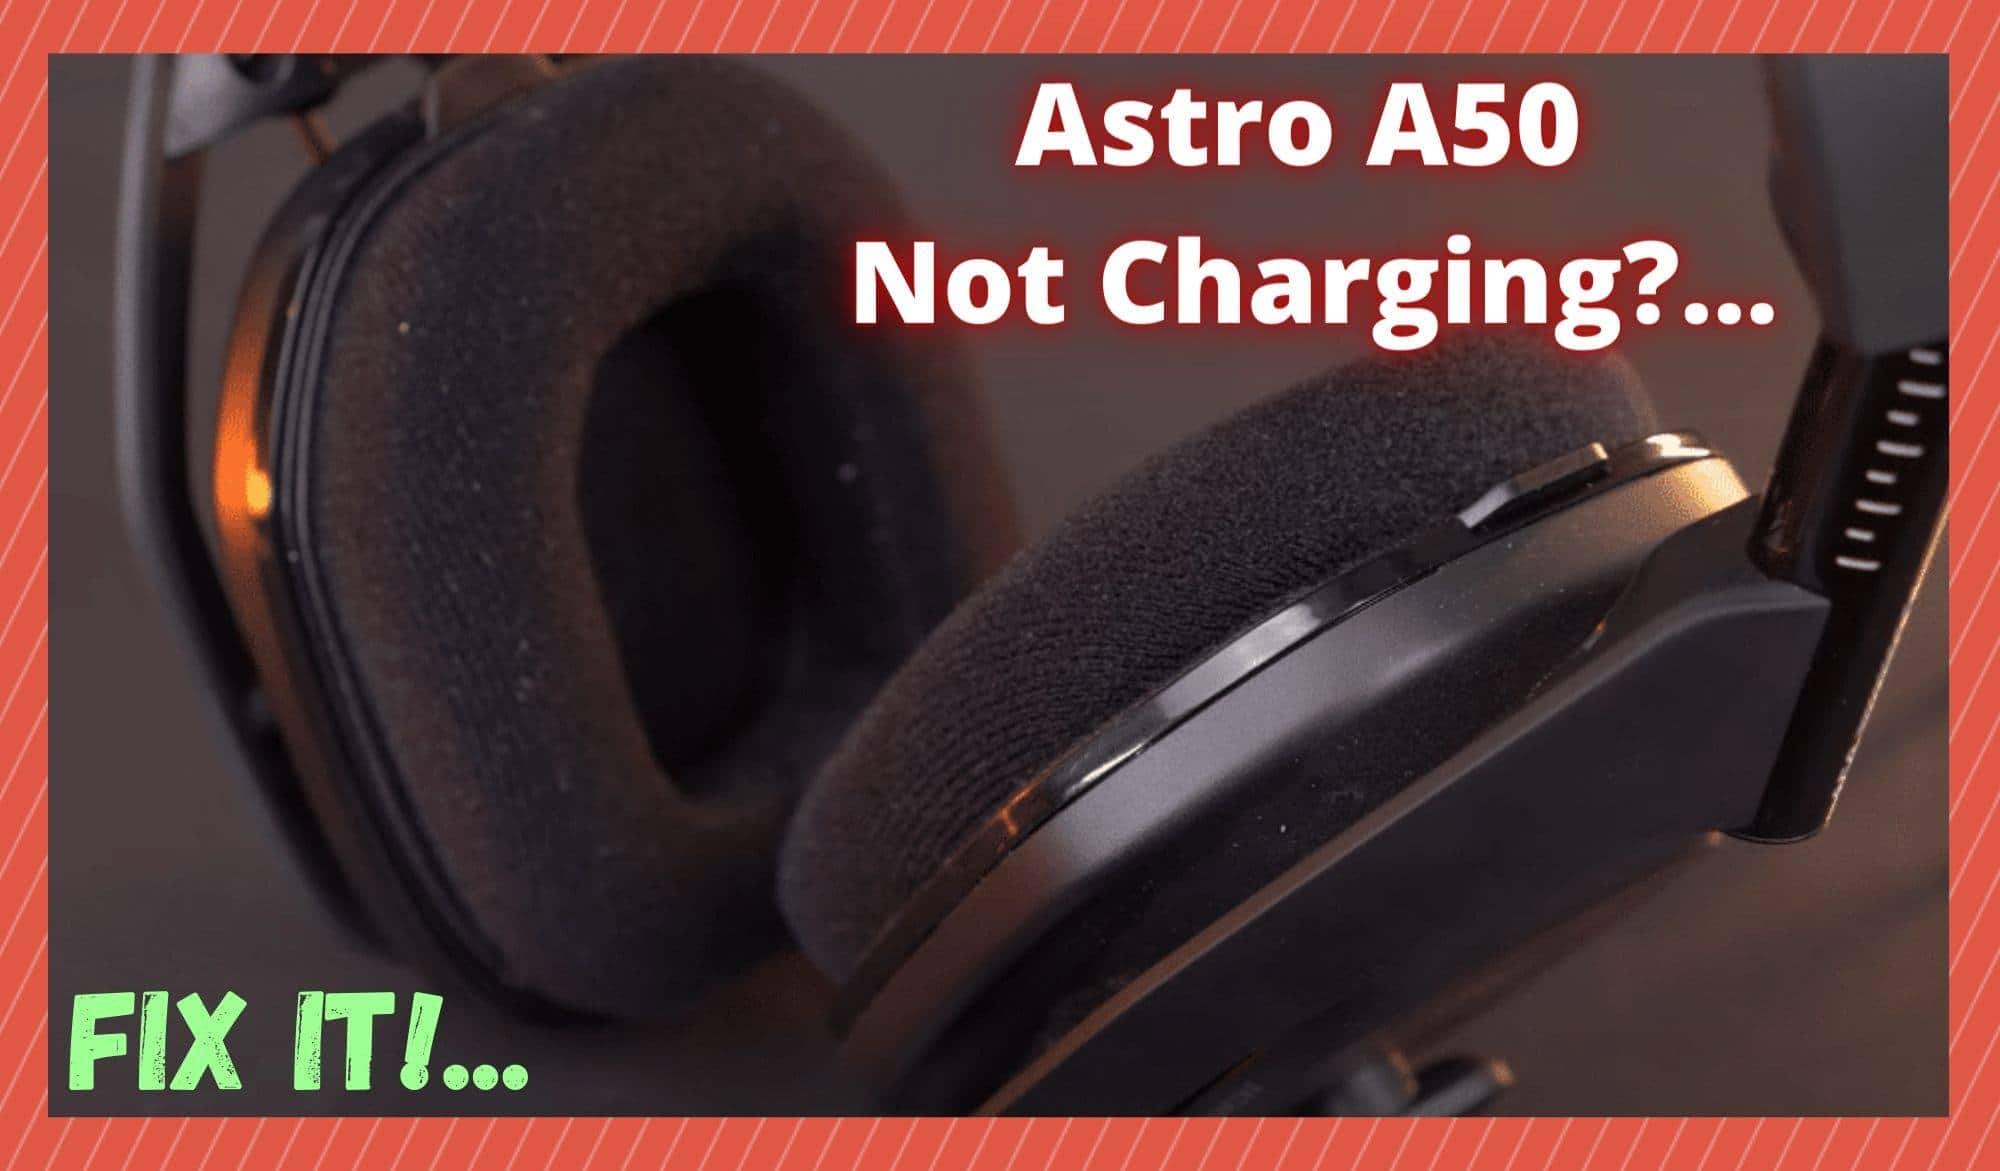 Astro A50 Not Charging